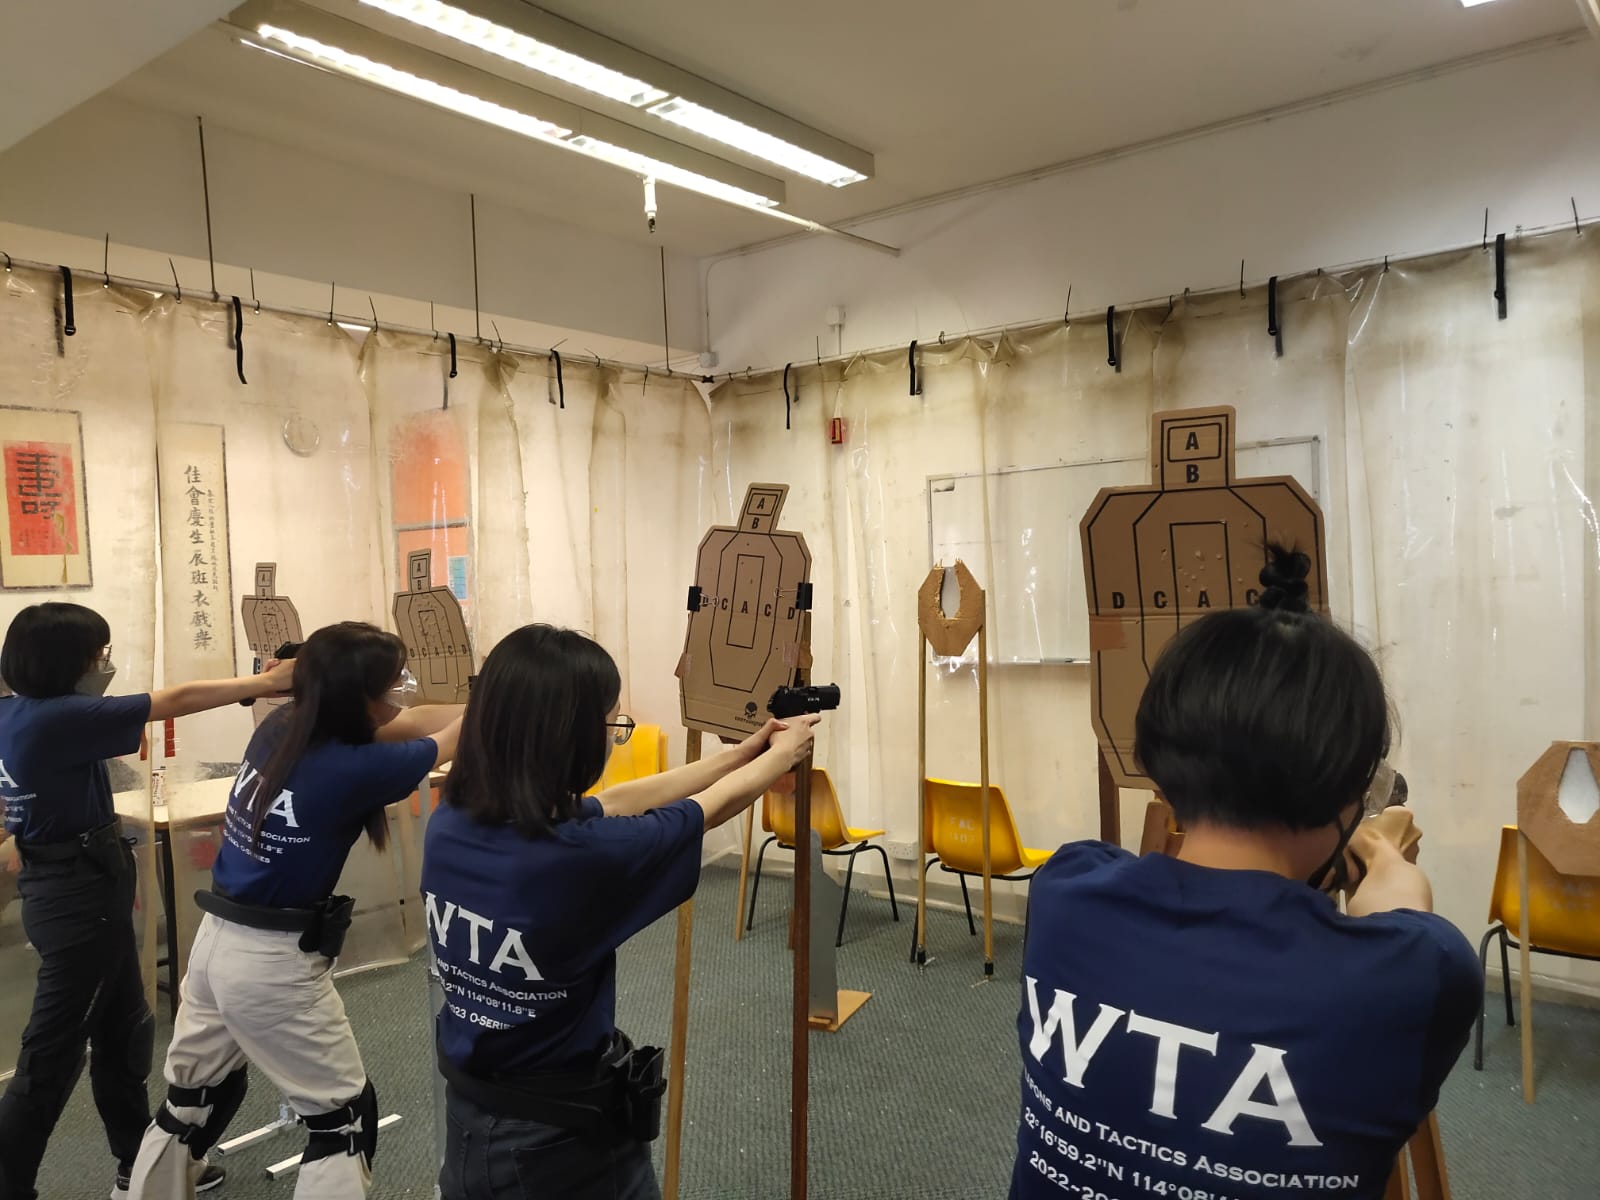 Students are participating in a shooting practice.